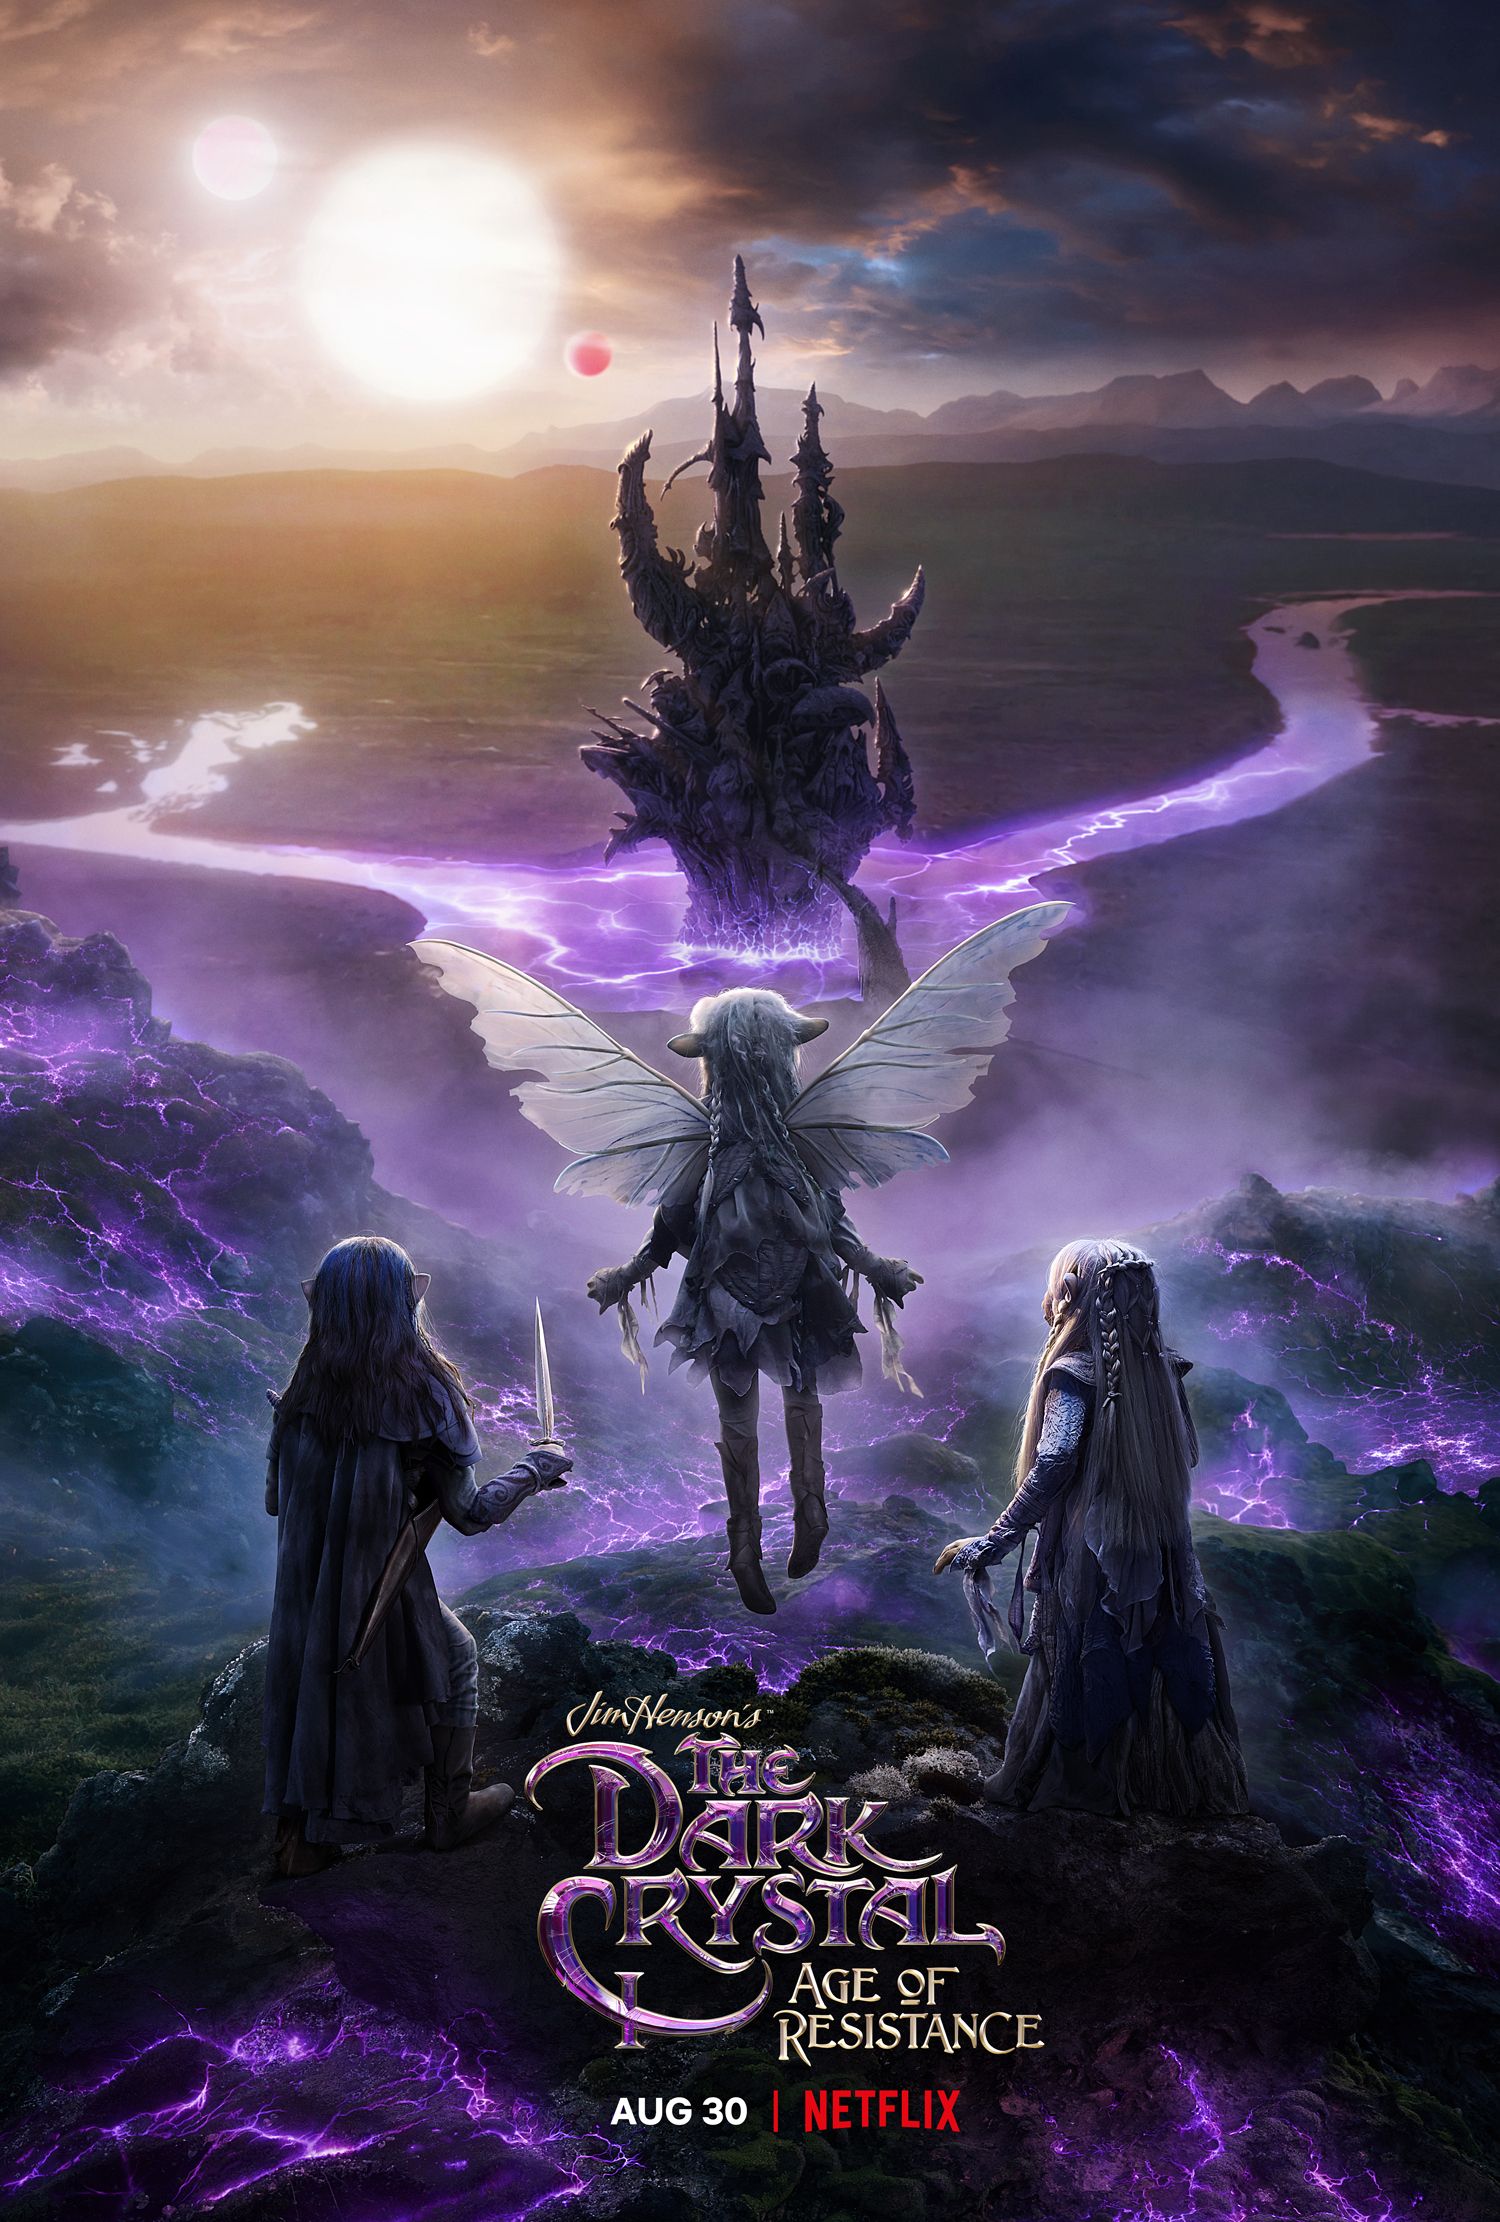 The Dark Crystal Age of Resistance Netflix Poster